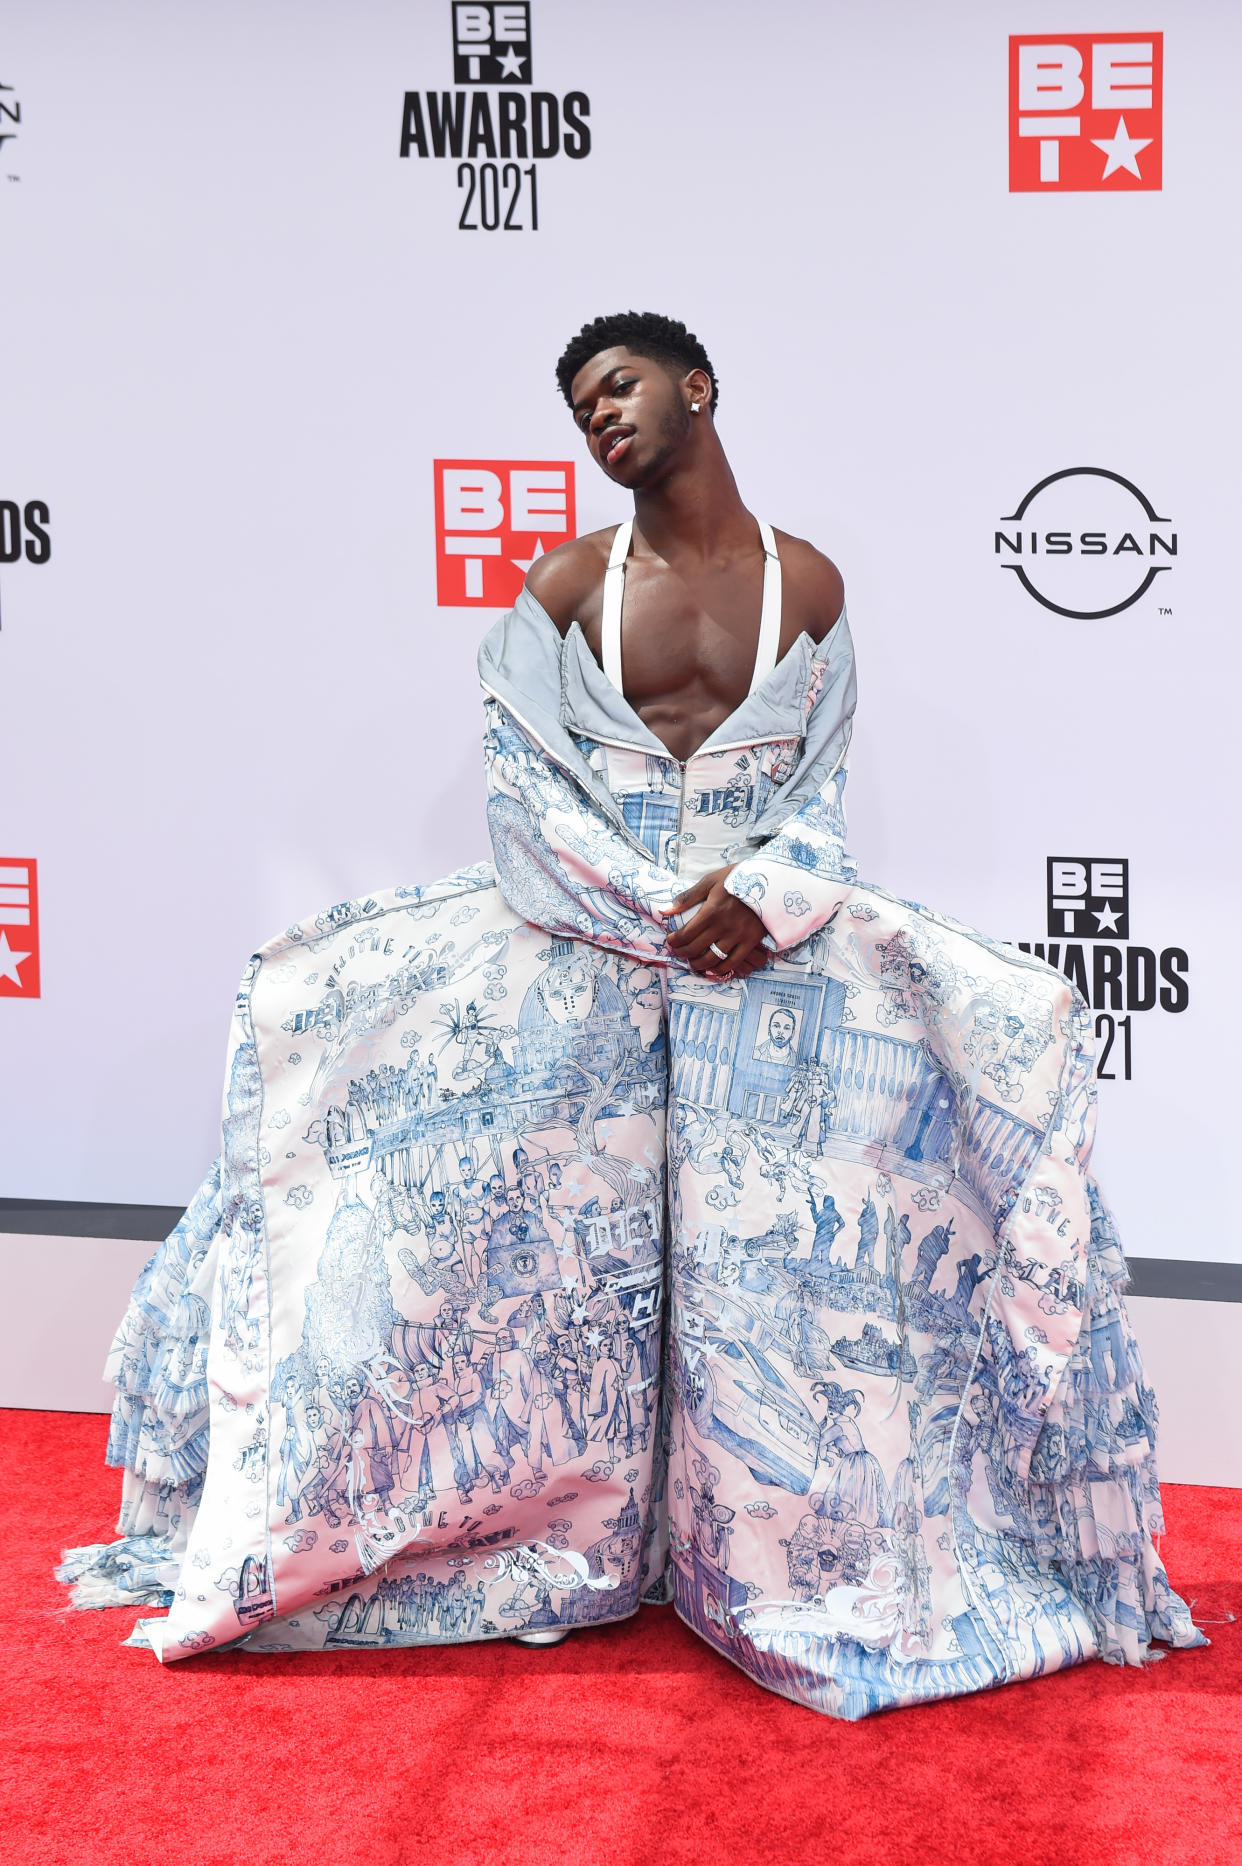 Lil Nas X attends the 2021 BET Awards. (Photo: Aaron J. Thornton/Getty Images)